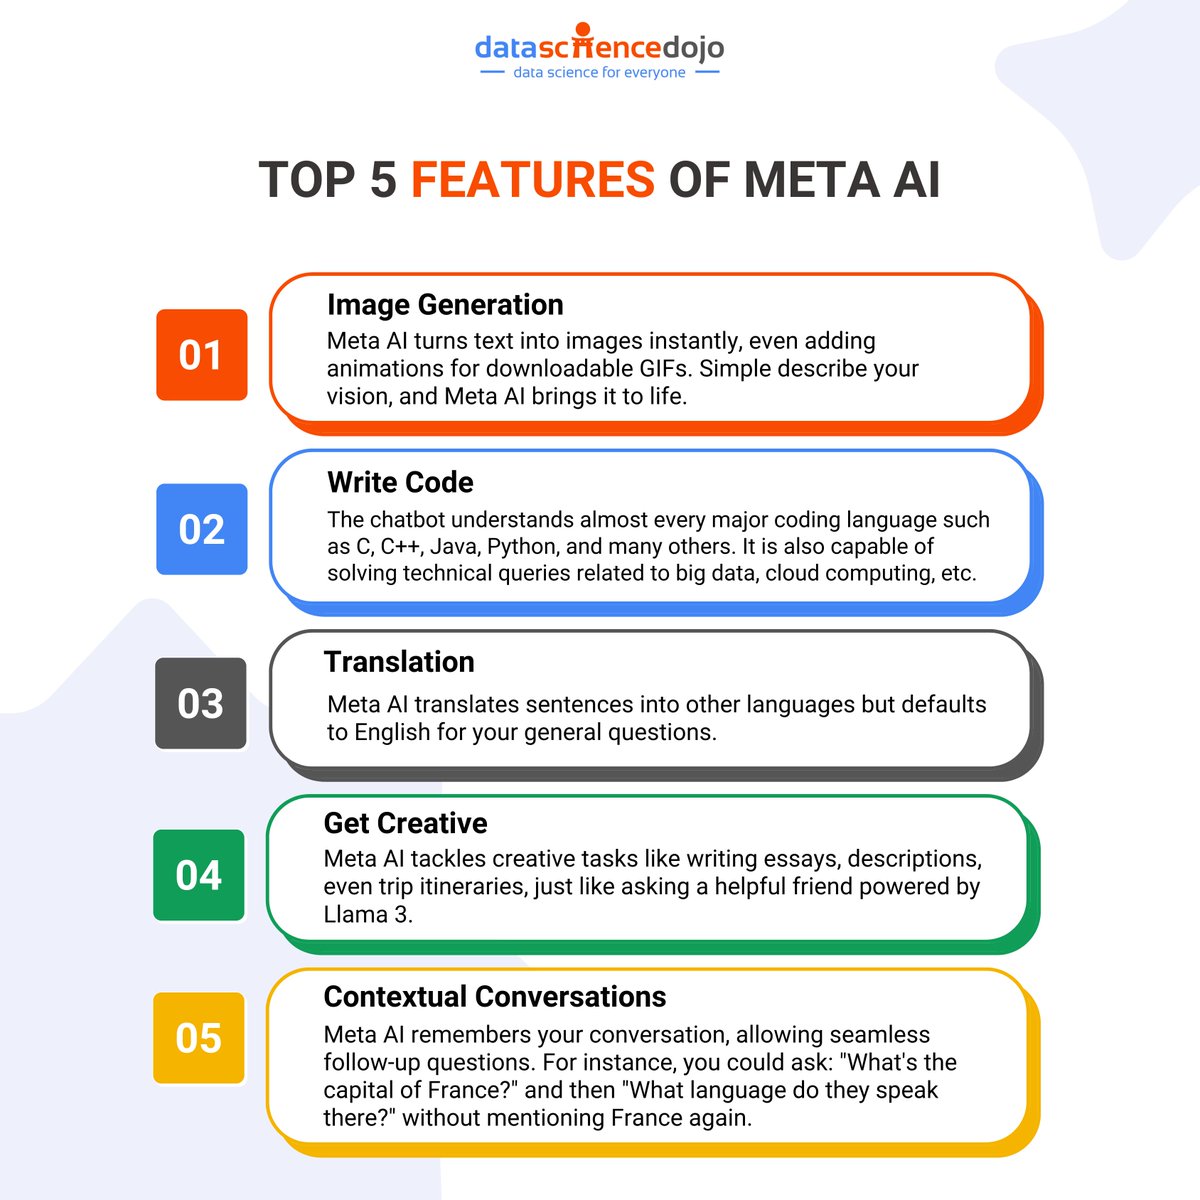 Meta AI: Beyond Facebook & Instagram 🔵 Meta AI isn't just about social media! Here are 5 mind-blowing features that show what they're really up to. Learn more ➡️ hubs.la/Q02w0FLT0 #MetaAI #generativeai #chatbot